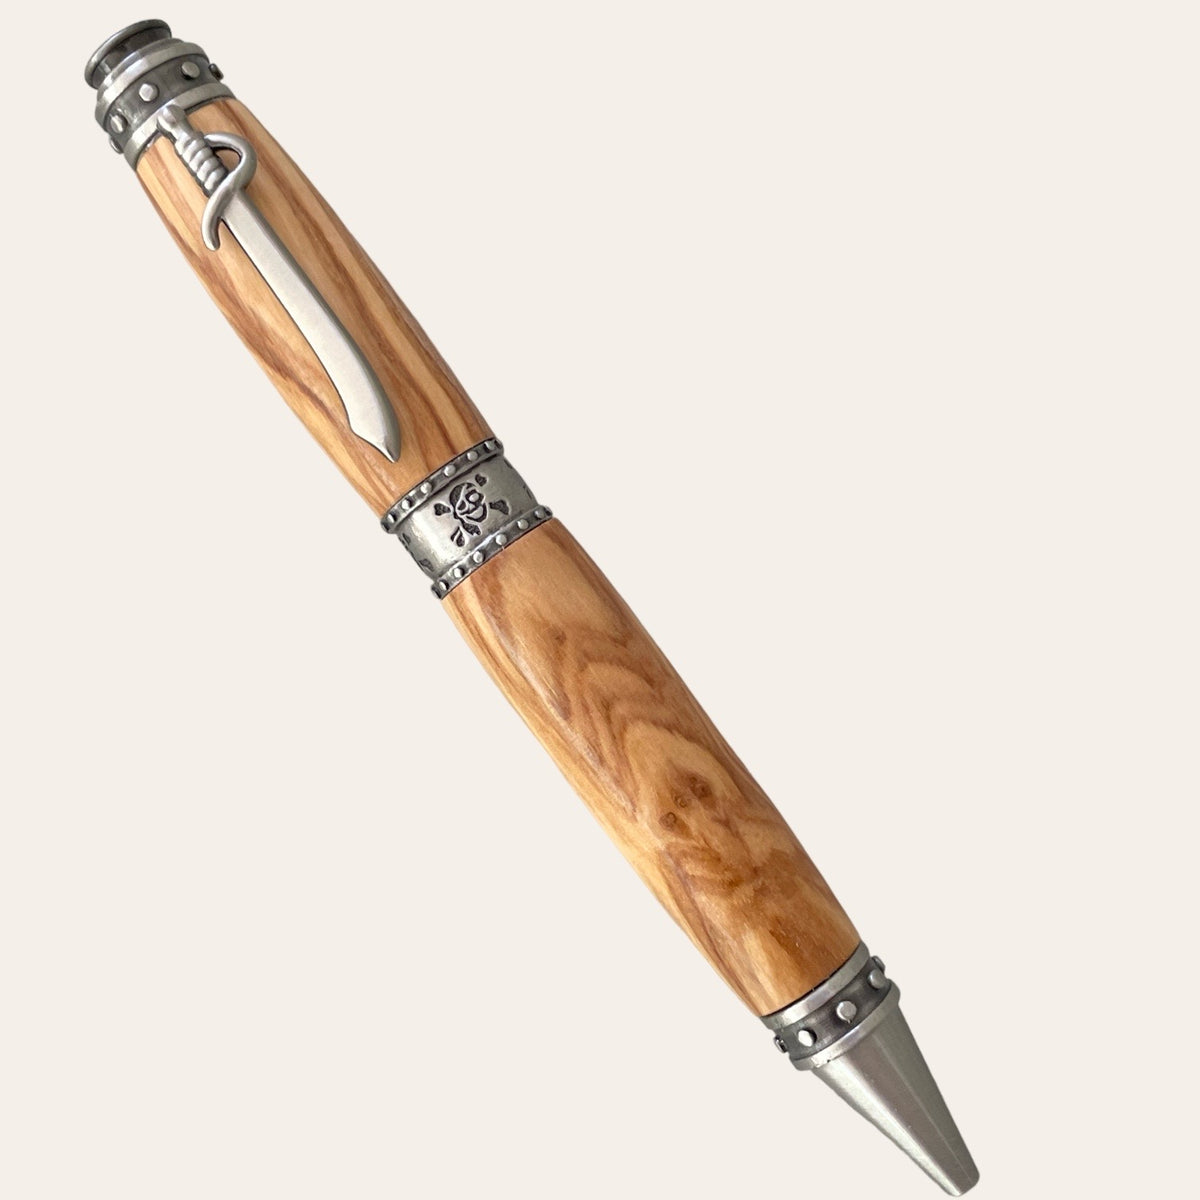 Bethlehem olive wood pirate theme twist pen with pewter trim. Paul's Hand Turned Creations